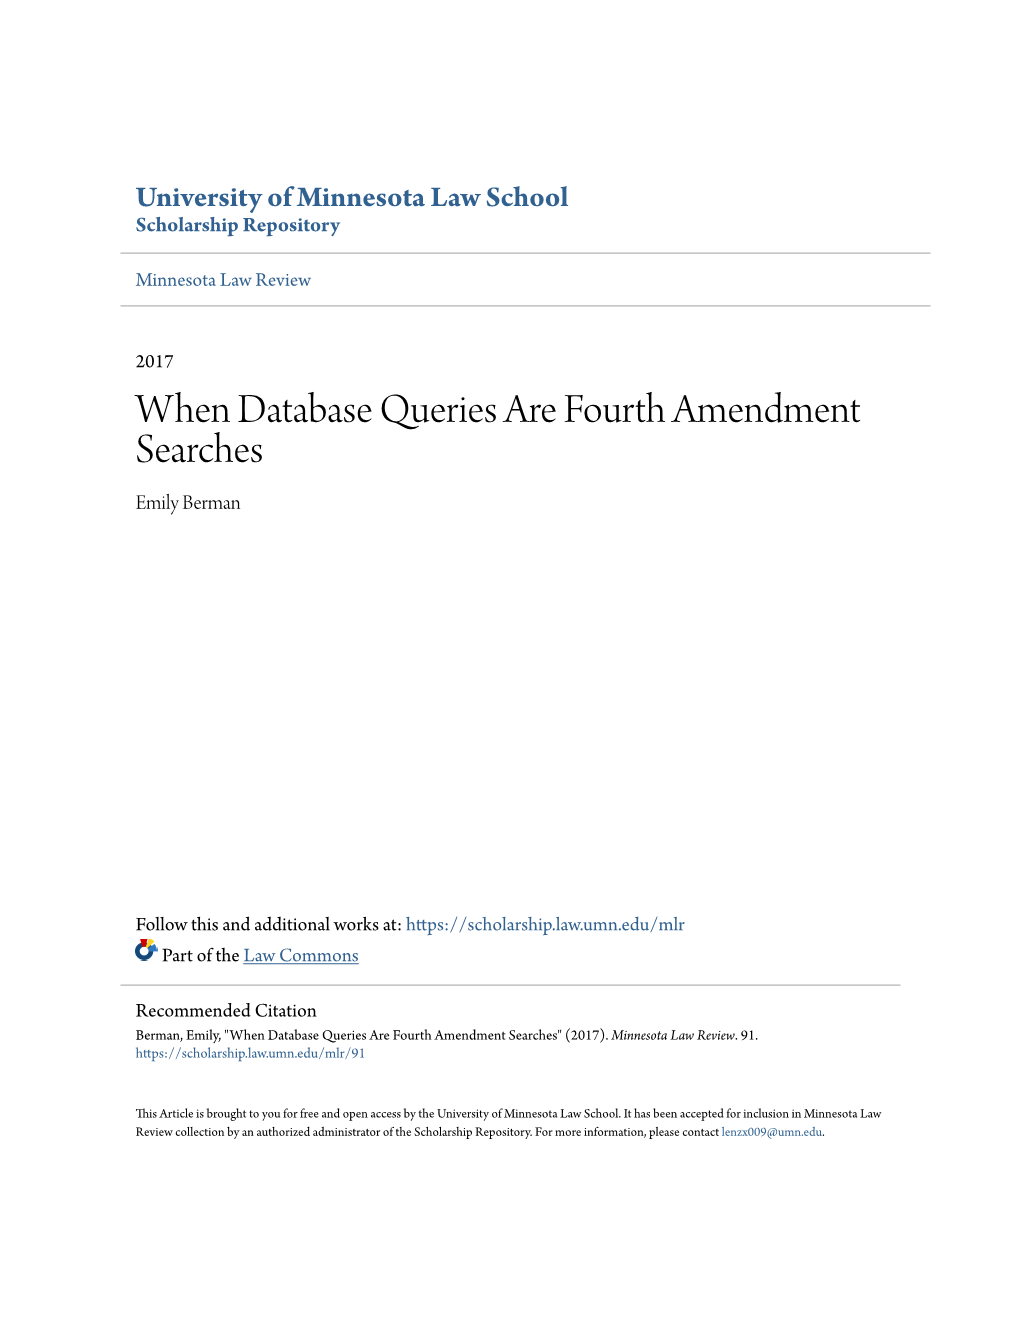 When Database Queries Are Fourth Amendment Searches Emily Berman